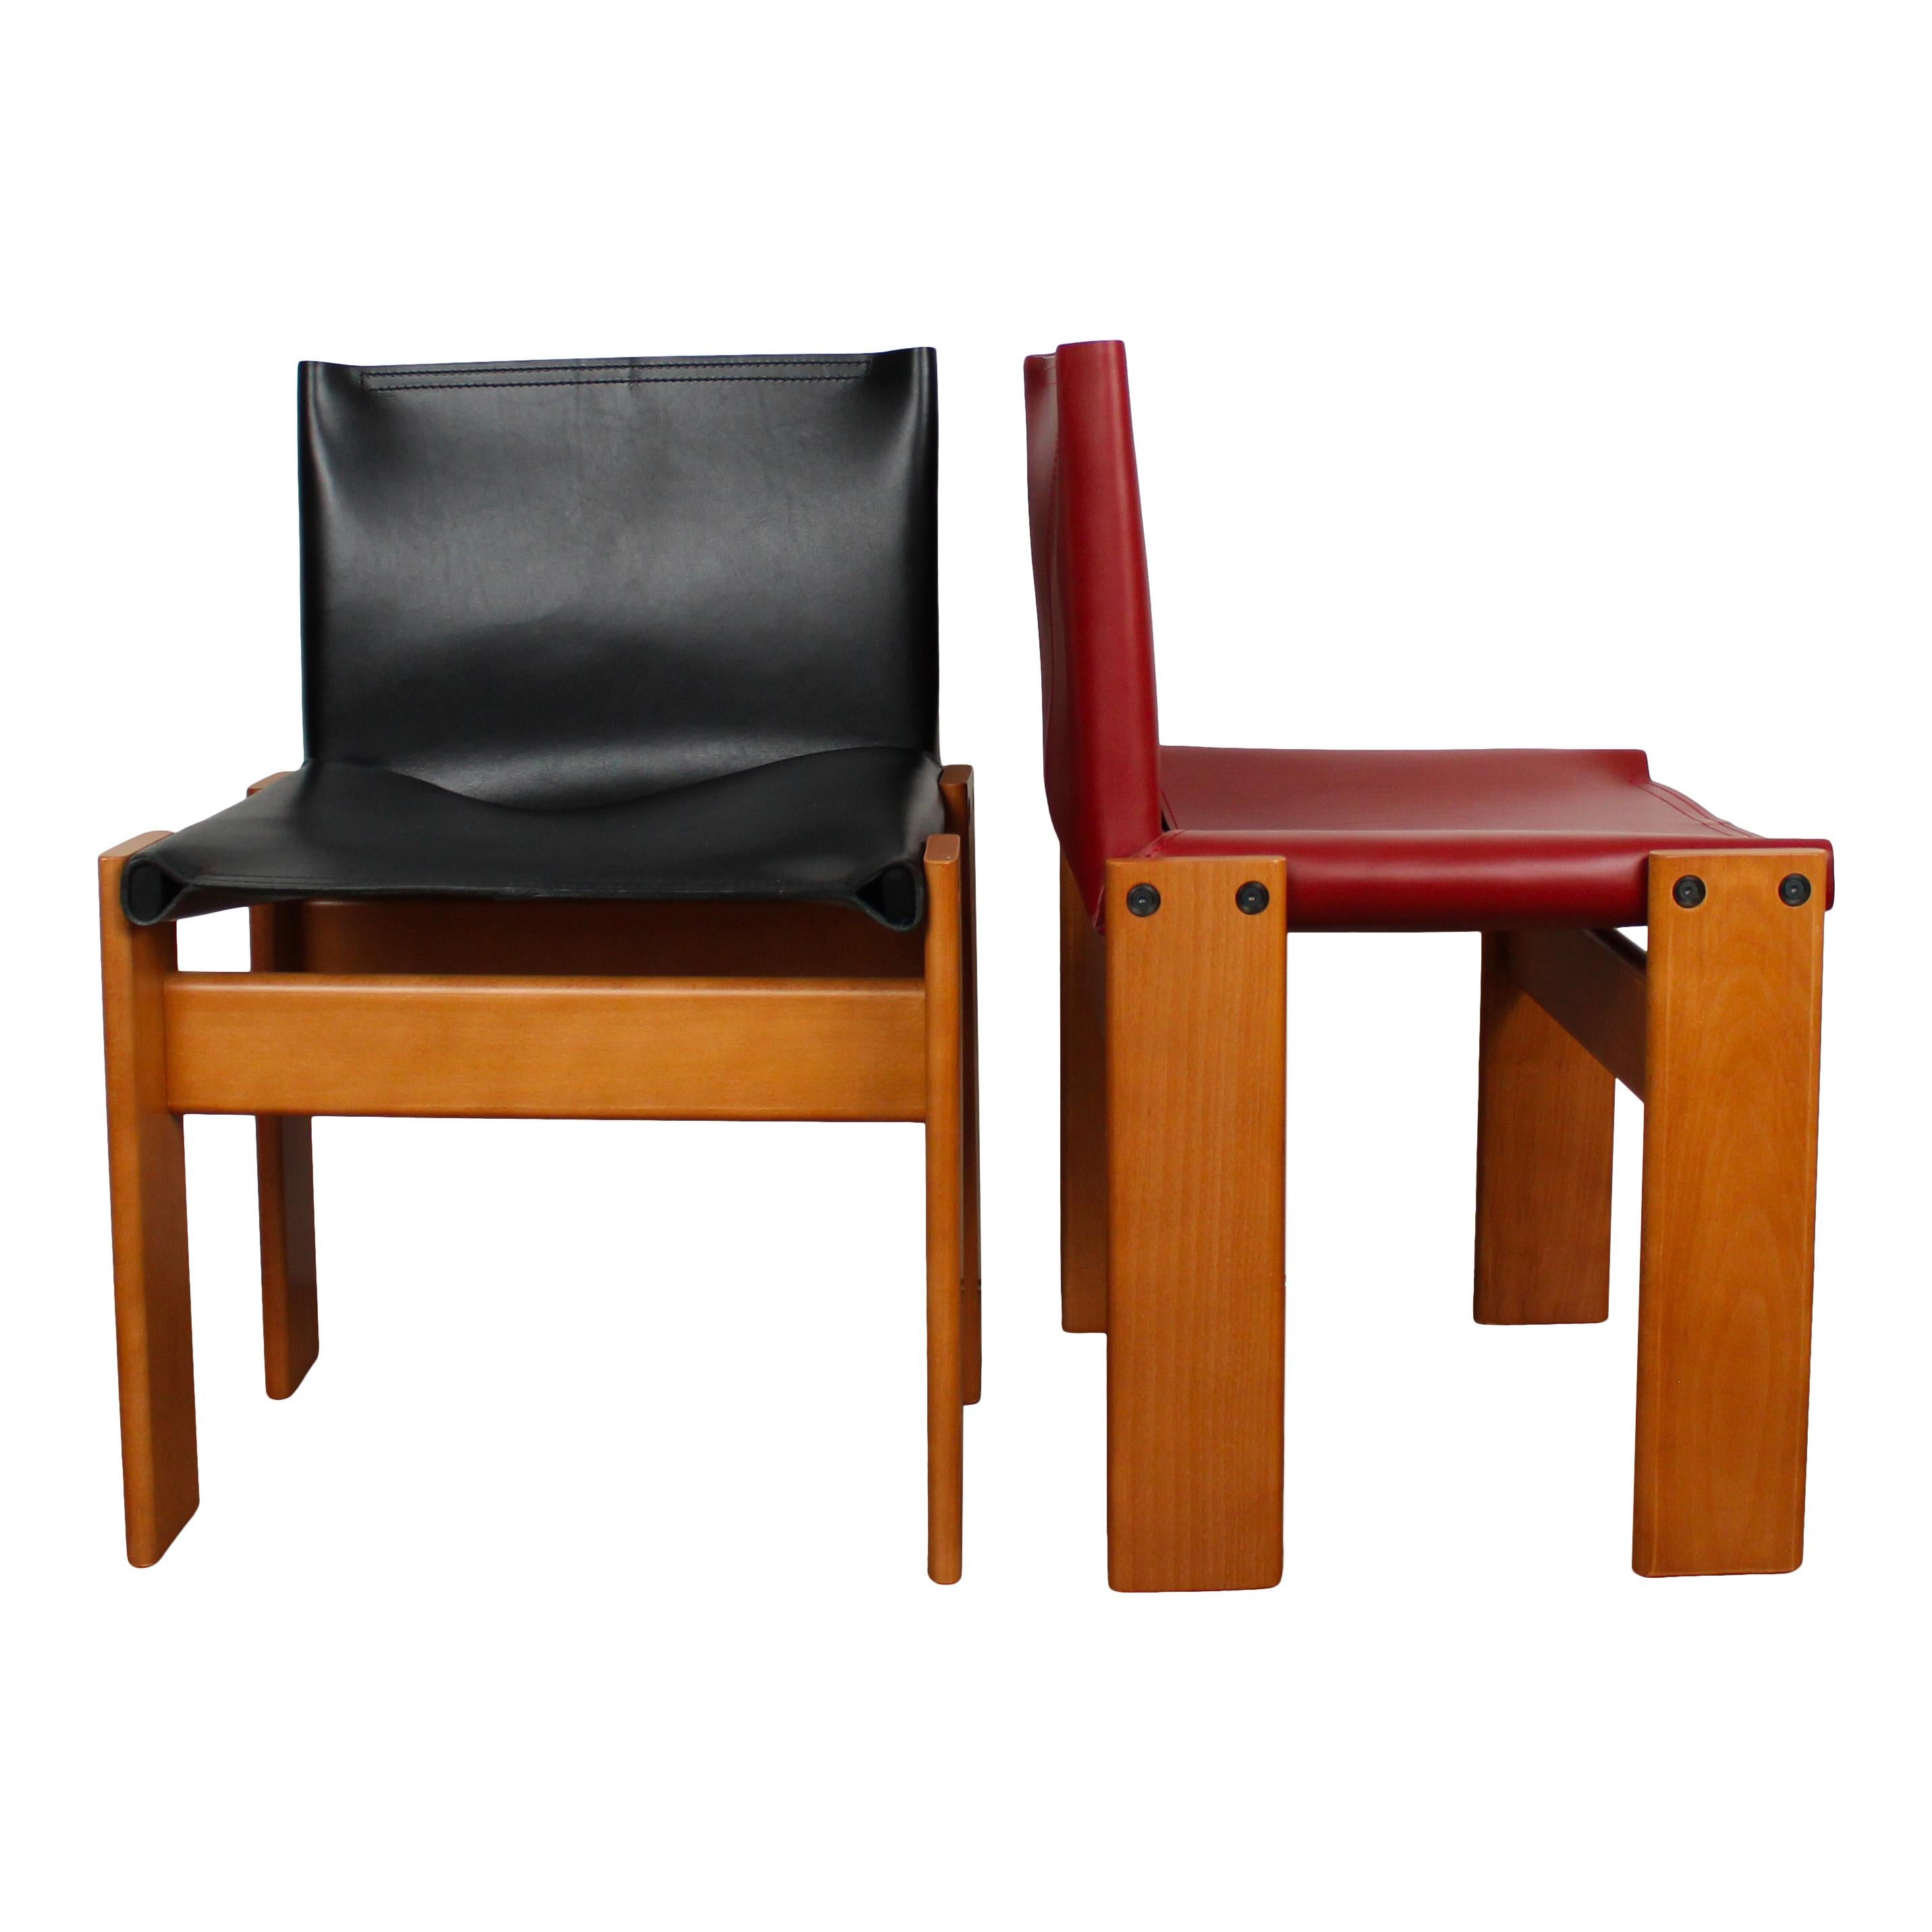 Afra & Tobia Scarpa Black & Red Leather Monk Dining Chair for Molteni, Set of 12 For Sale 3